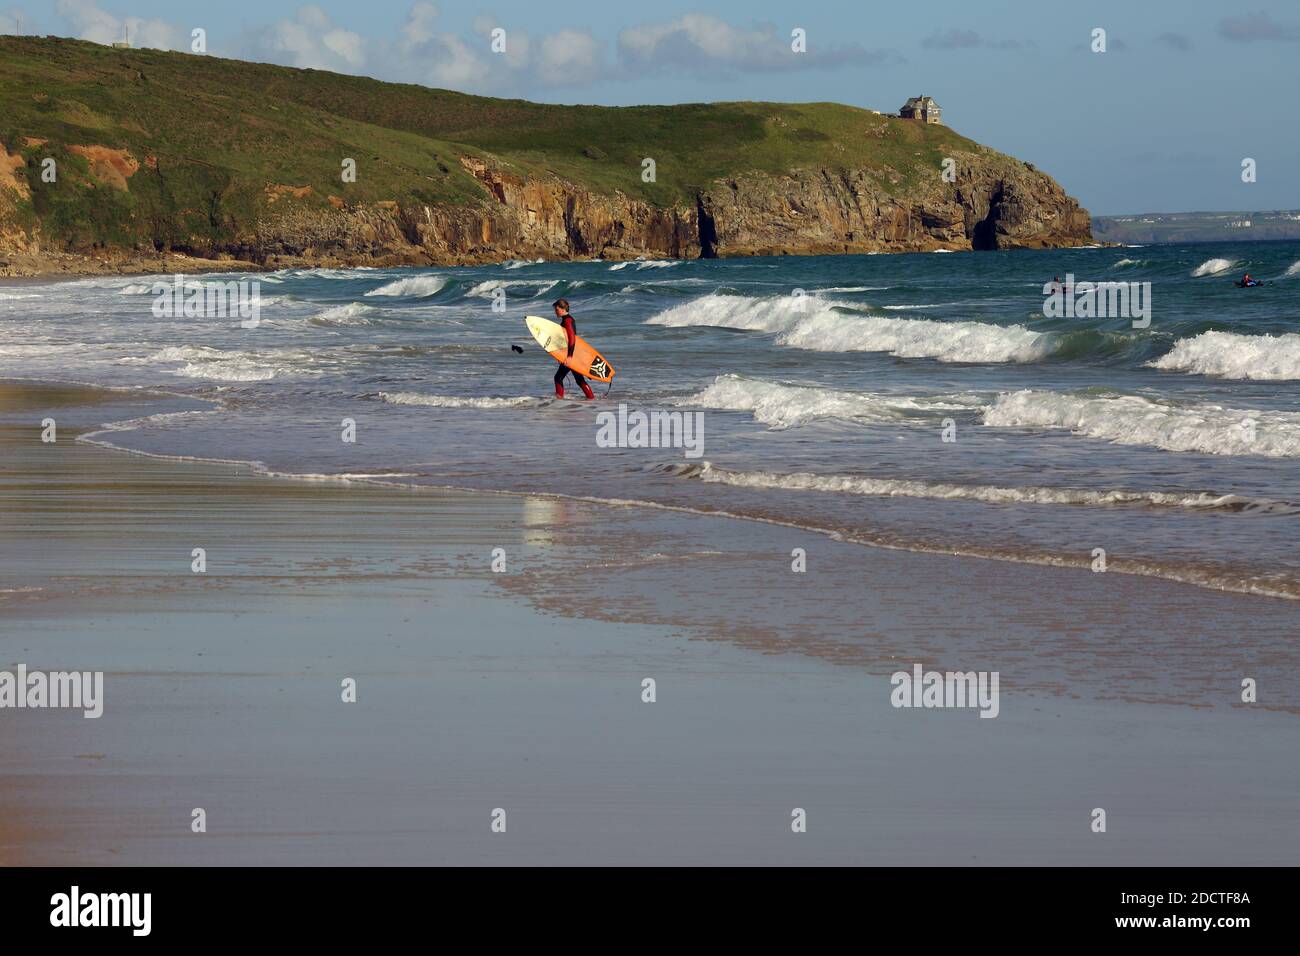 Surfer getting into the ocean at  Praa Sands Beach Cornwall, England, United Kingdom, Stock Photo